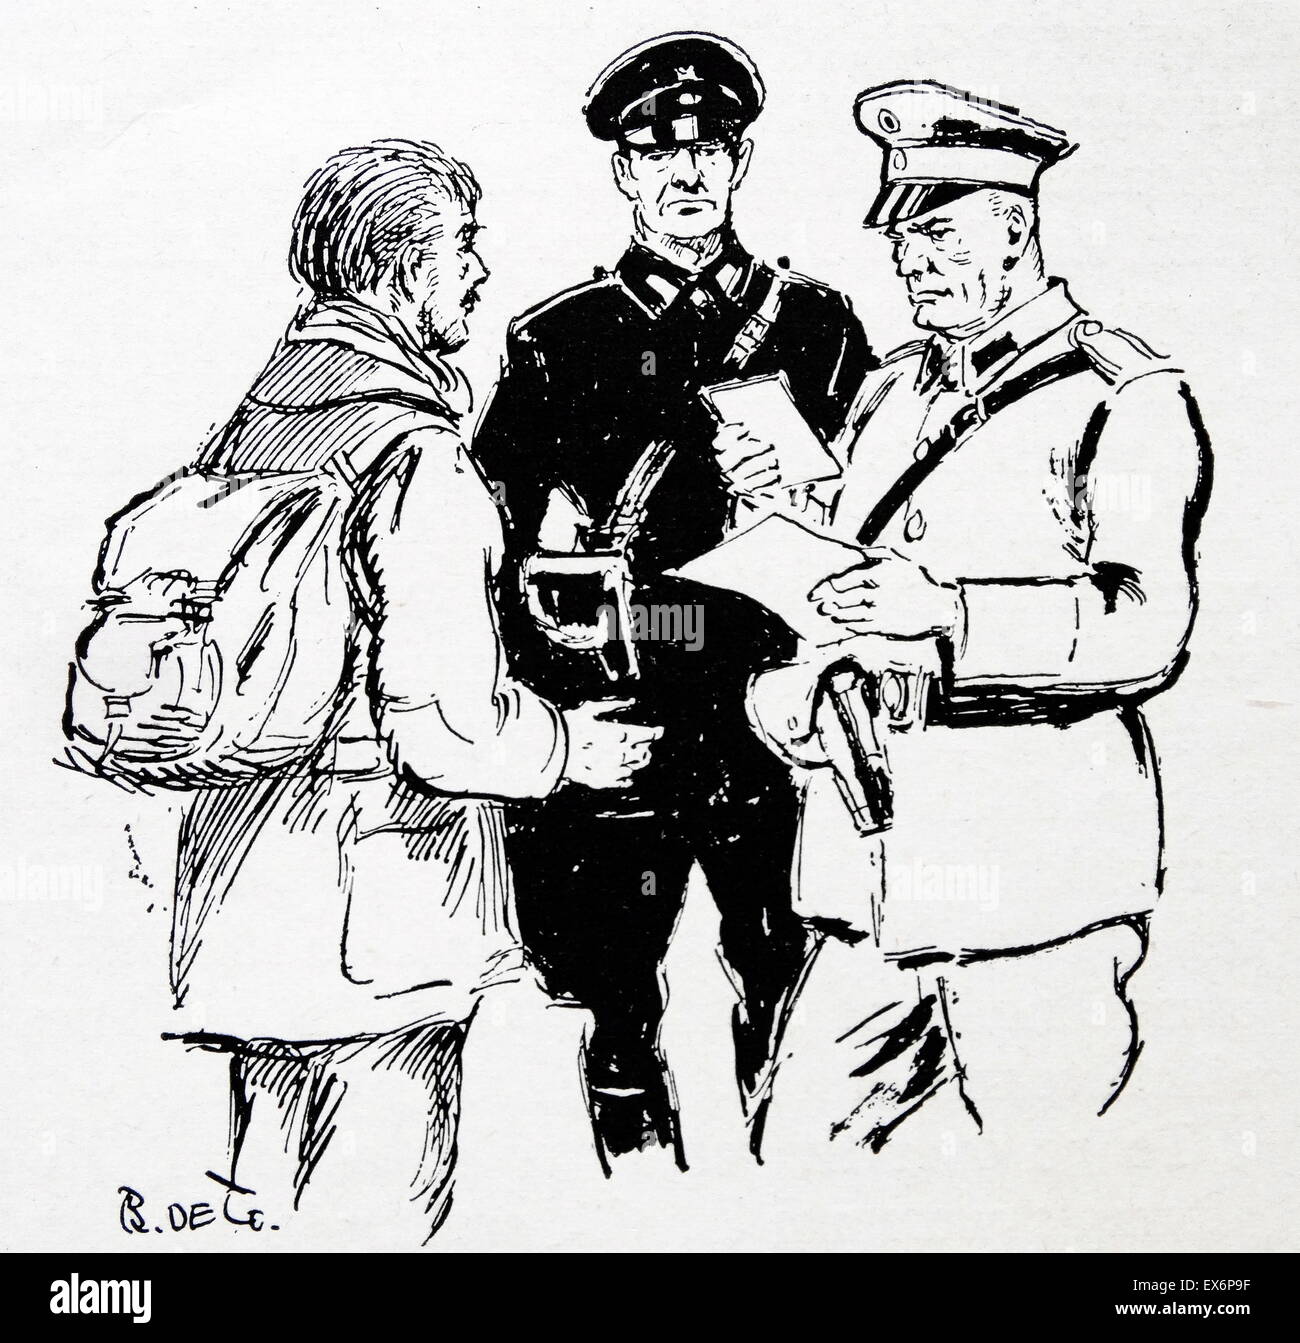 illustration depicting an escaped British prisoner of war having his forged papers examined by Nazi officers Stock Photo